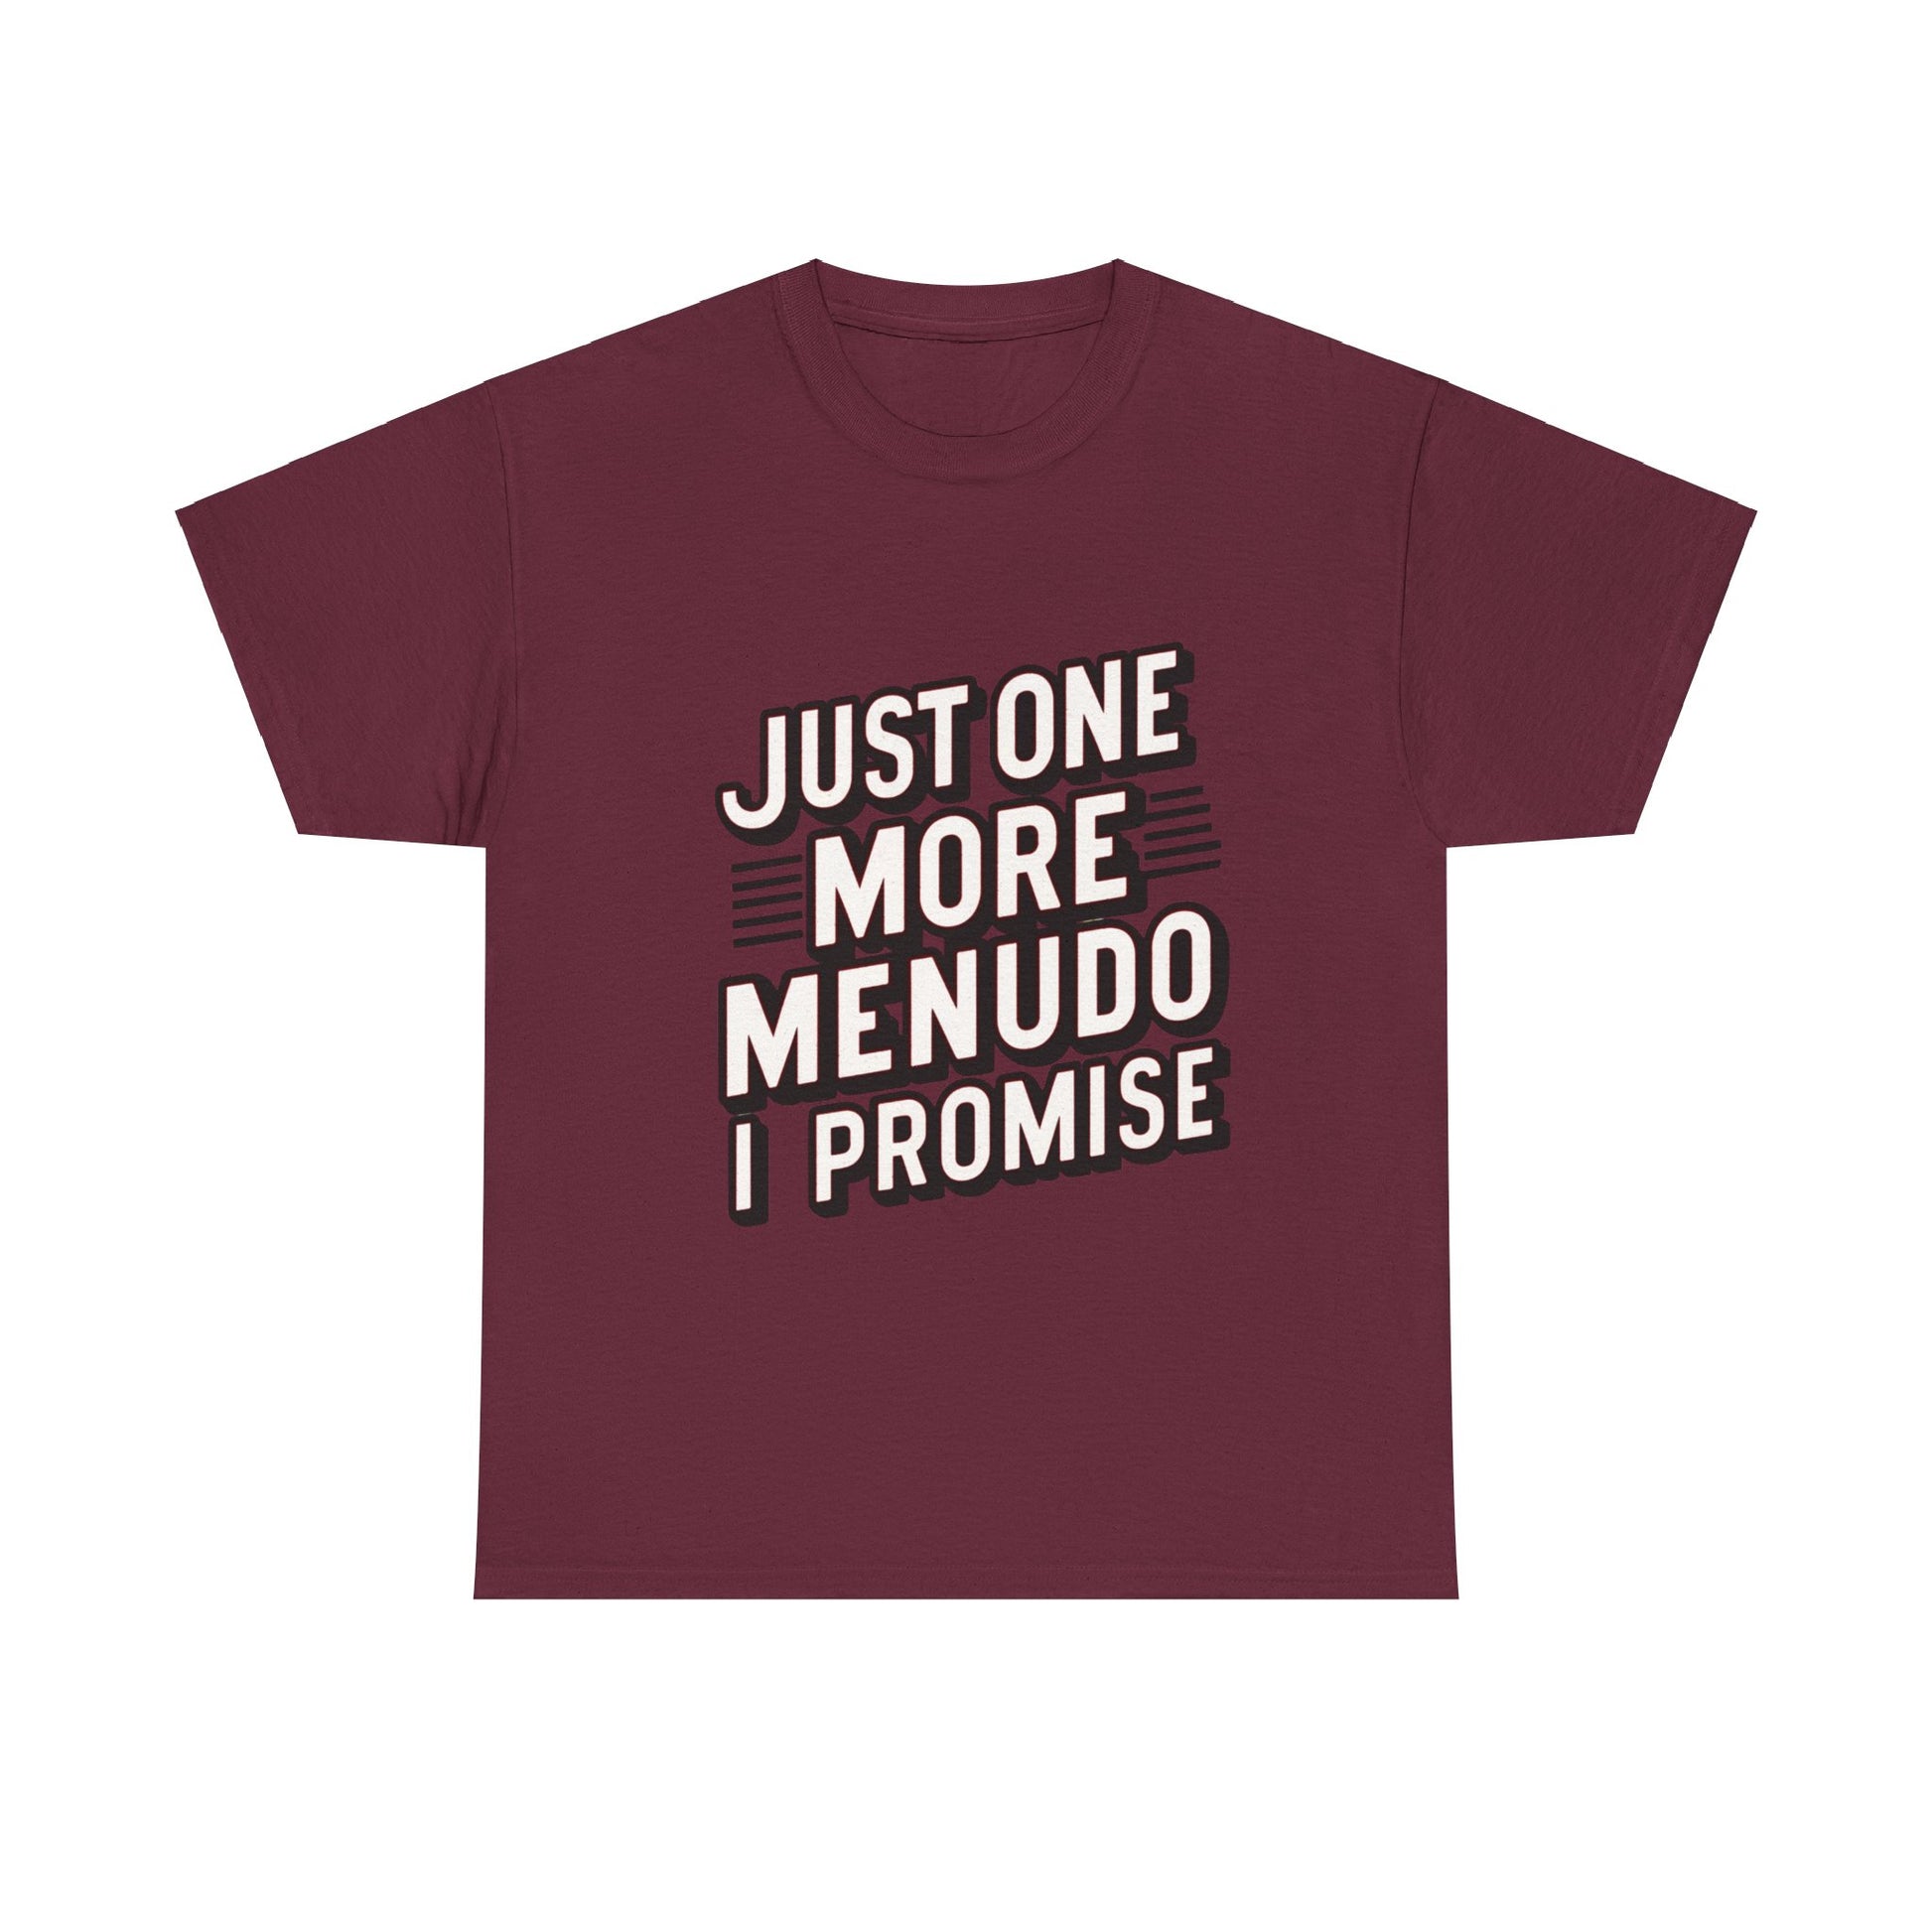 Just One More Menudo I Promise Mexican Food Graphic Unisex Heavy Cotton Tee Cotton Funny Humorous Graphic Soft Premium Unisex Men Women Maroon T-shirt Birthday Gift-5